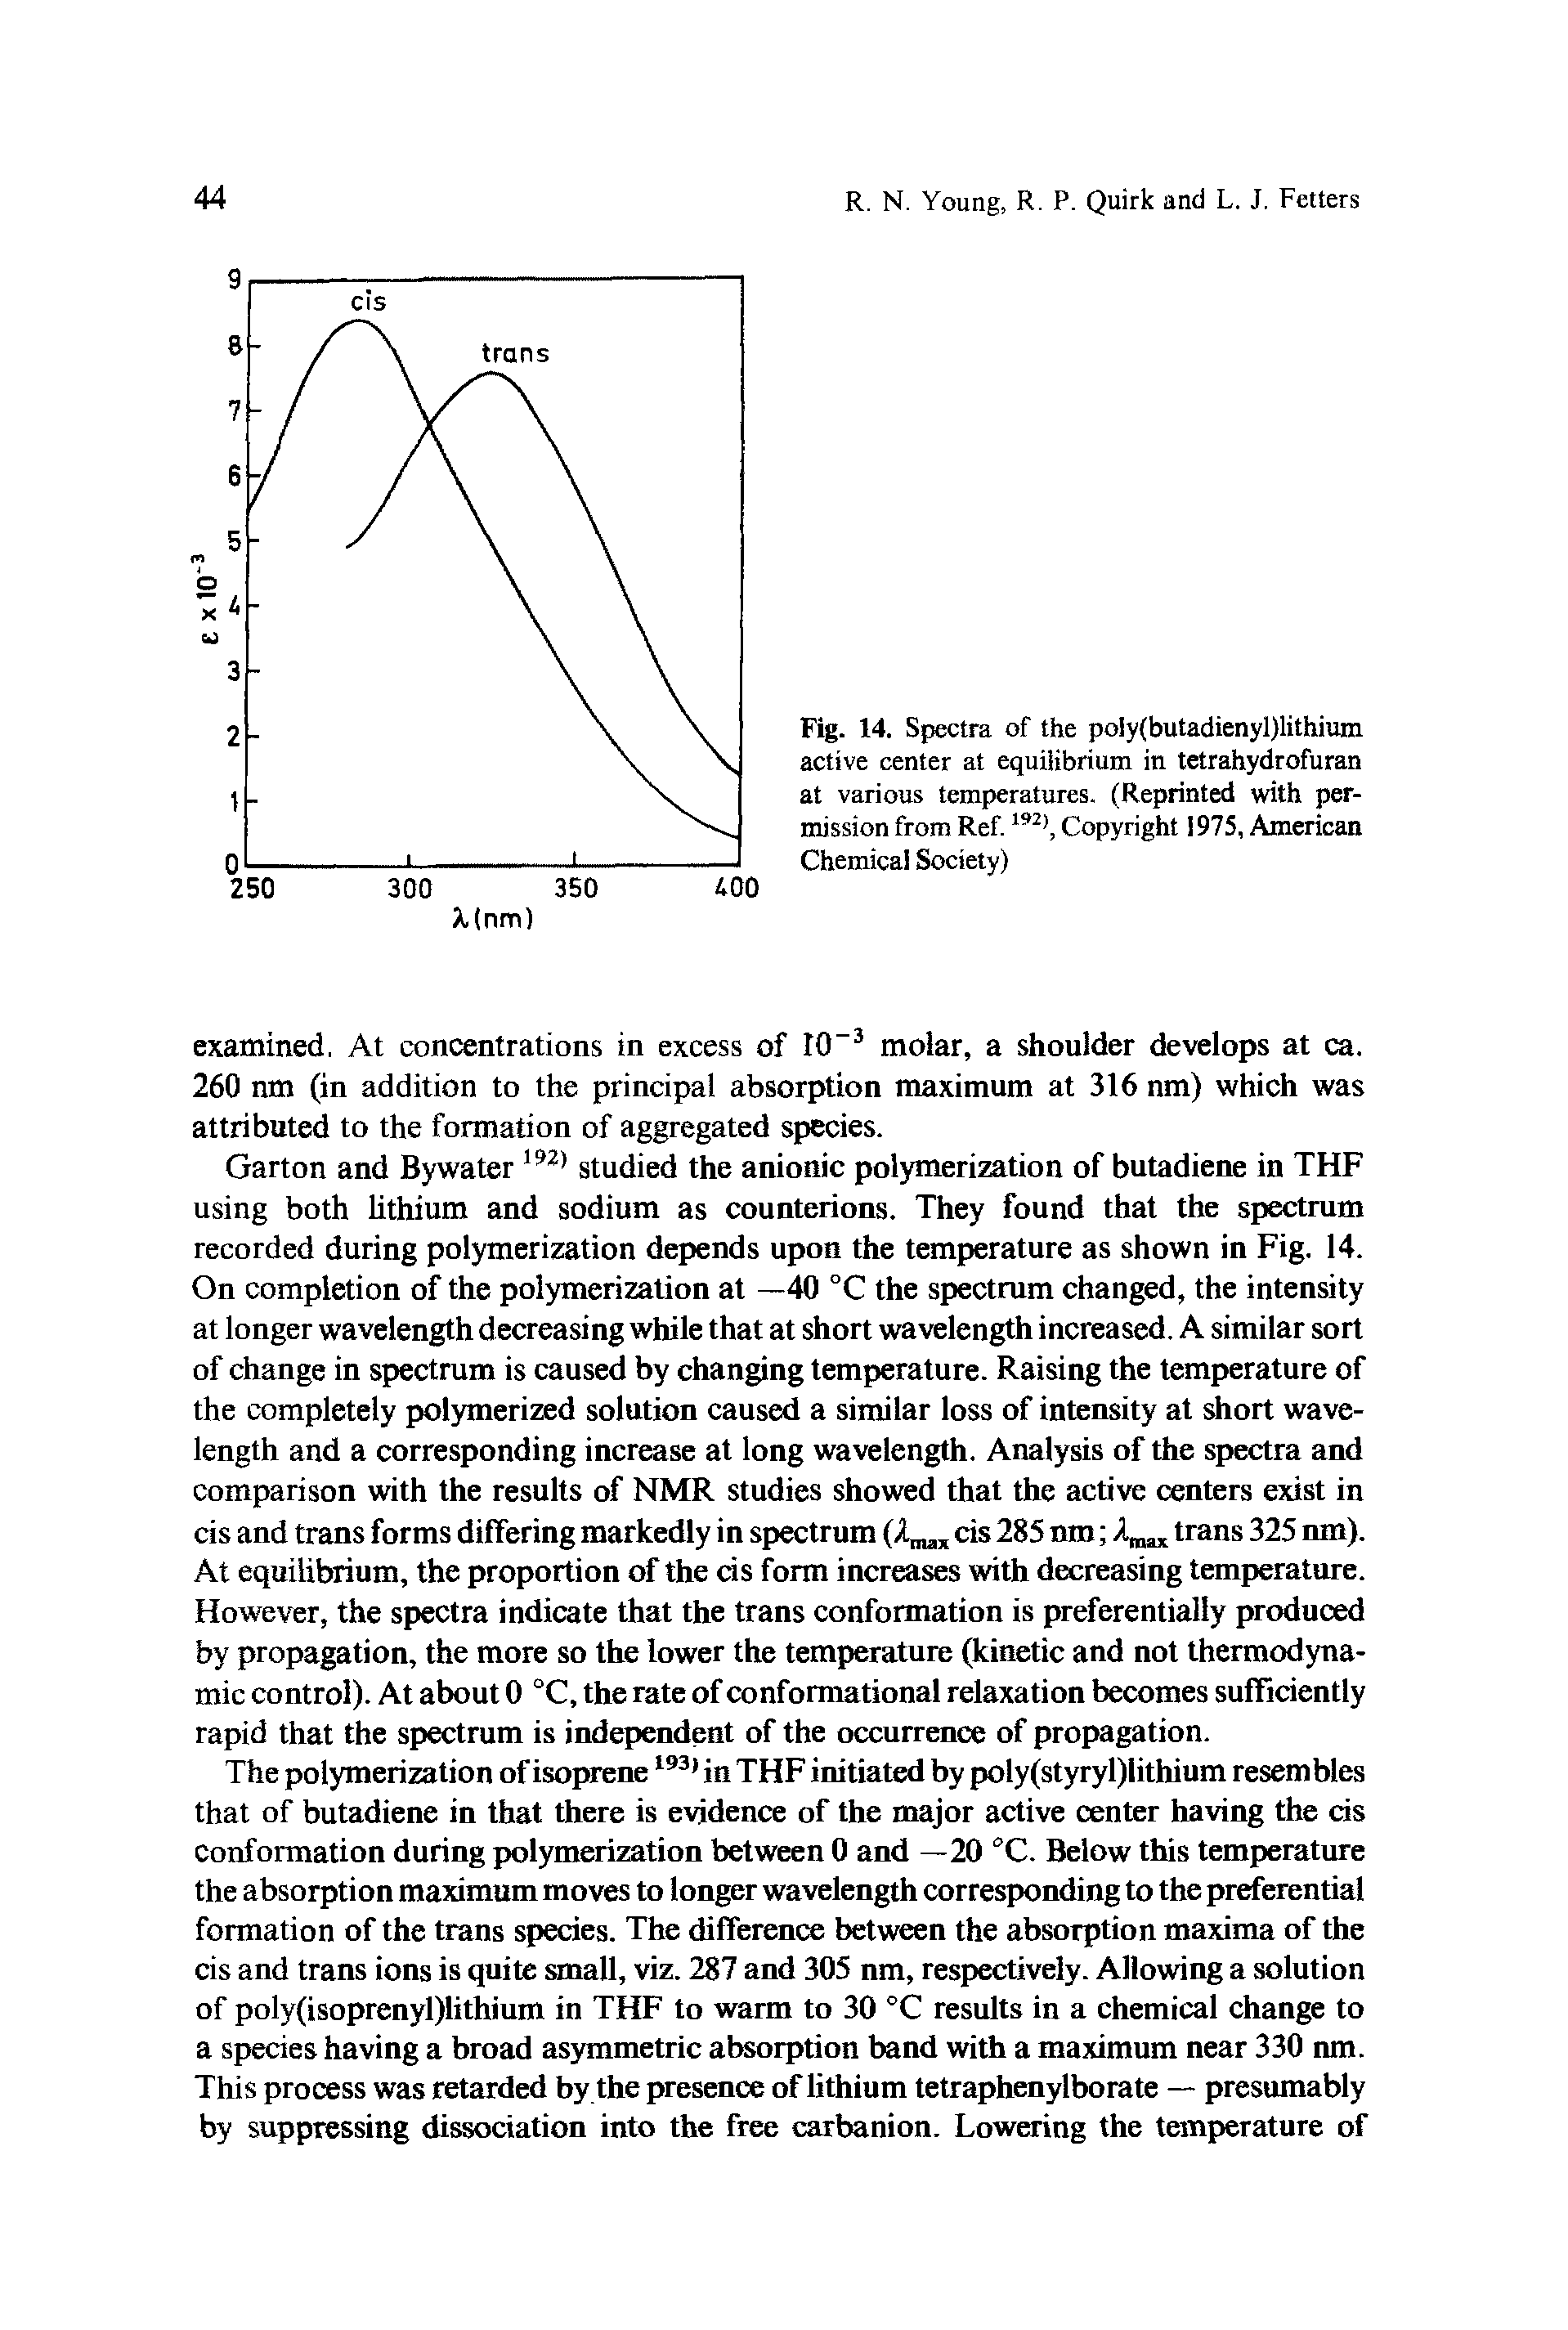 Fig. 14. Spectra of the poIy(butadienyl)lithium active center at equilibrium in tetrahydrofuran at various temperatures. (Reprinted with permission from Ref.192), Copyright 1975, American Chemical Society)...